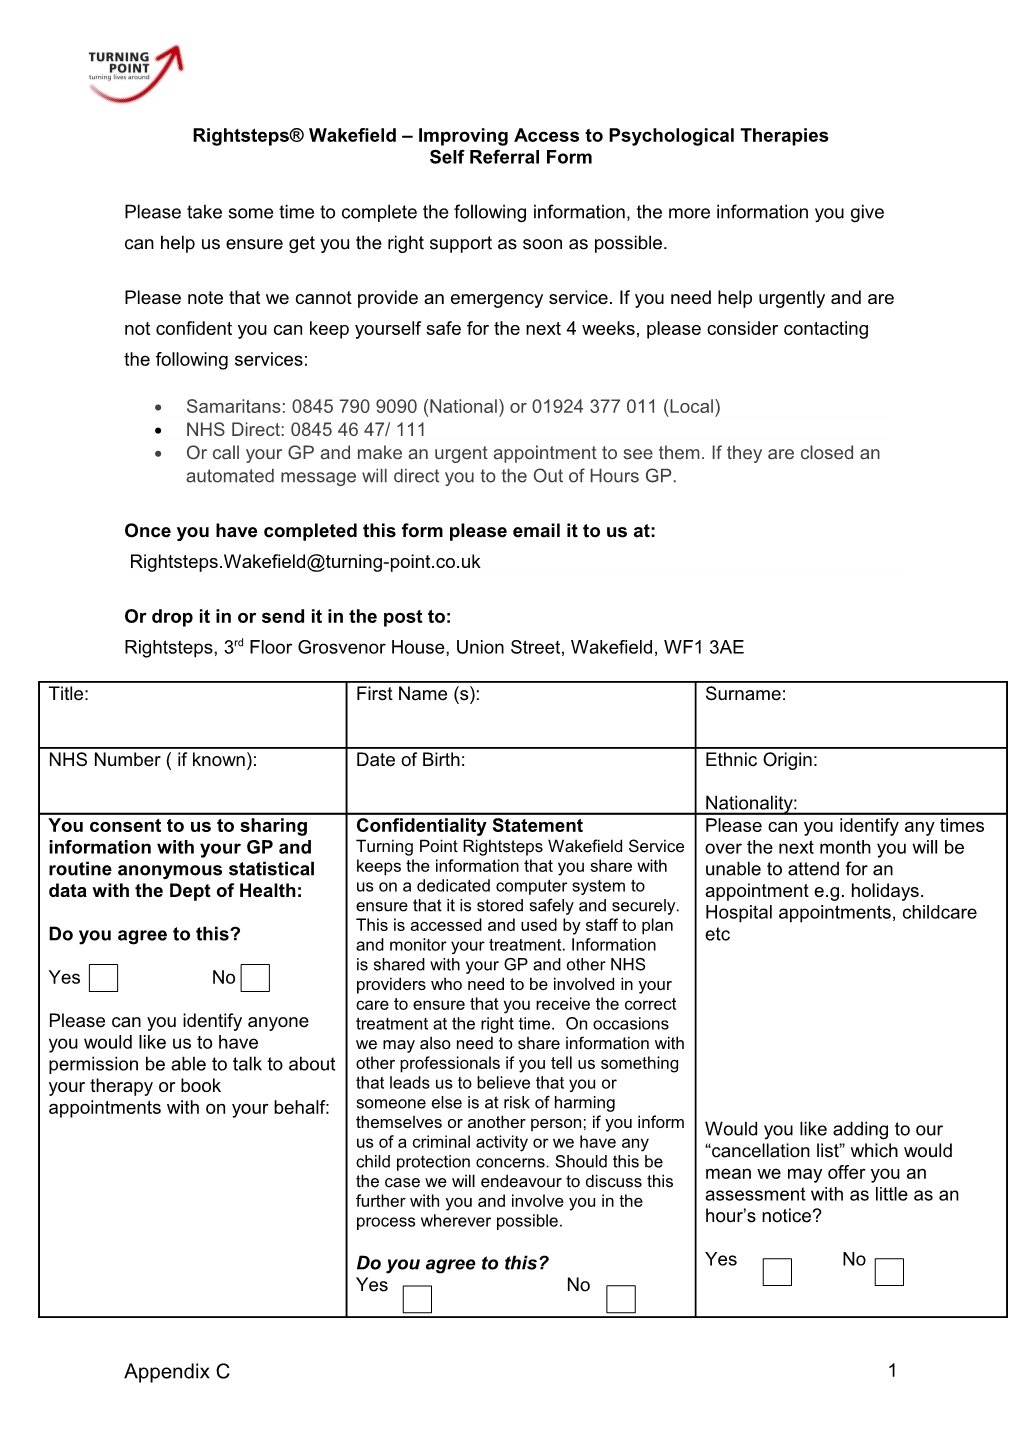 Referral Form Wakefield Righsteps